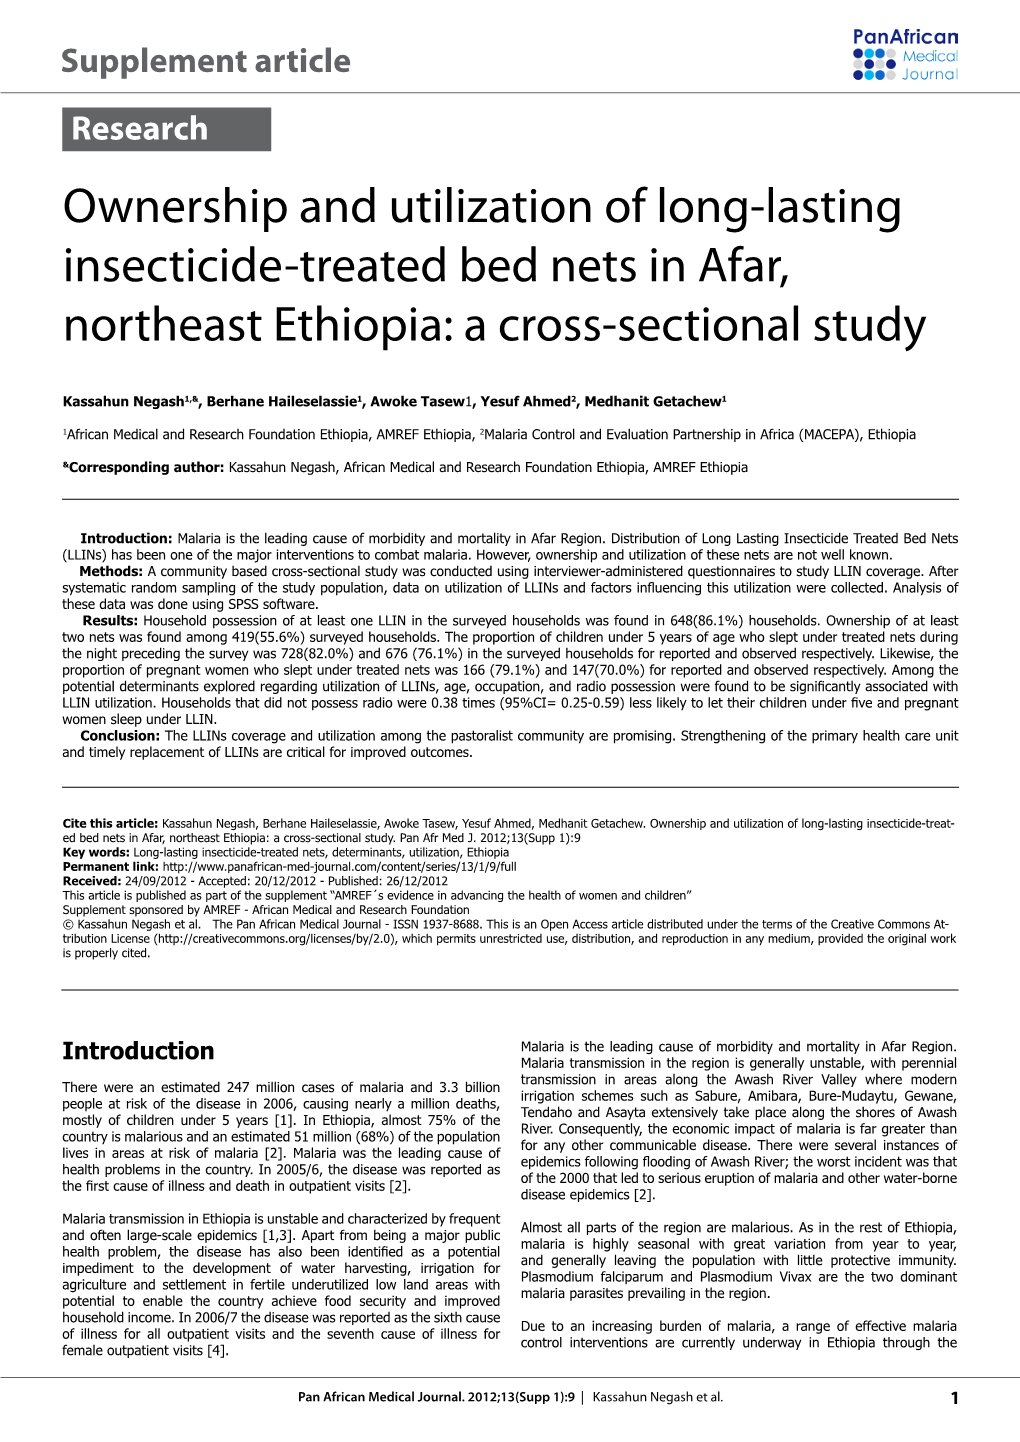 Ownership and Utilization of Long-Lasting Insecticide-Treated Bed Nets in Afar, Northeast Ethiopia: a Cross-Sectional Study